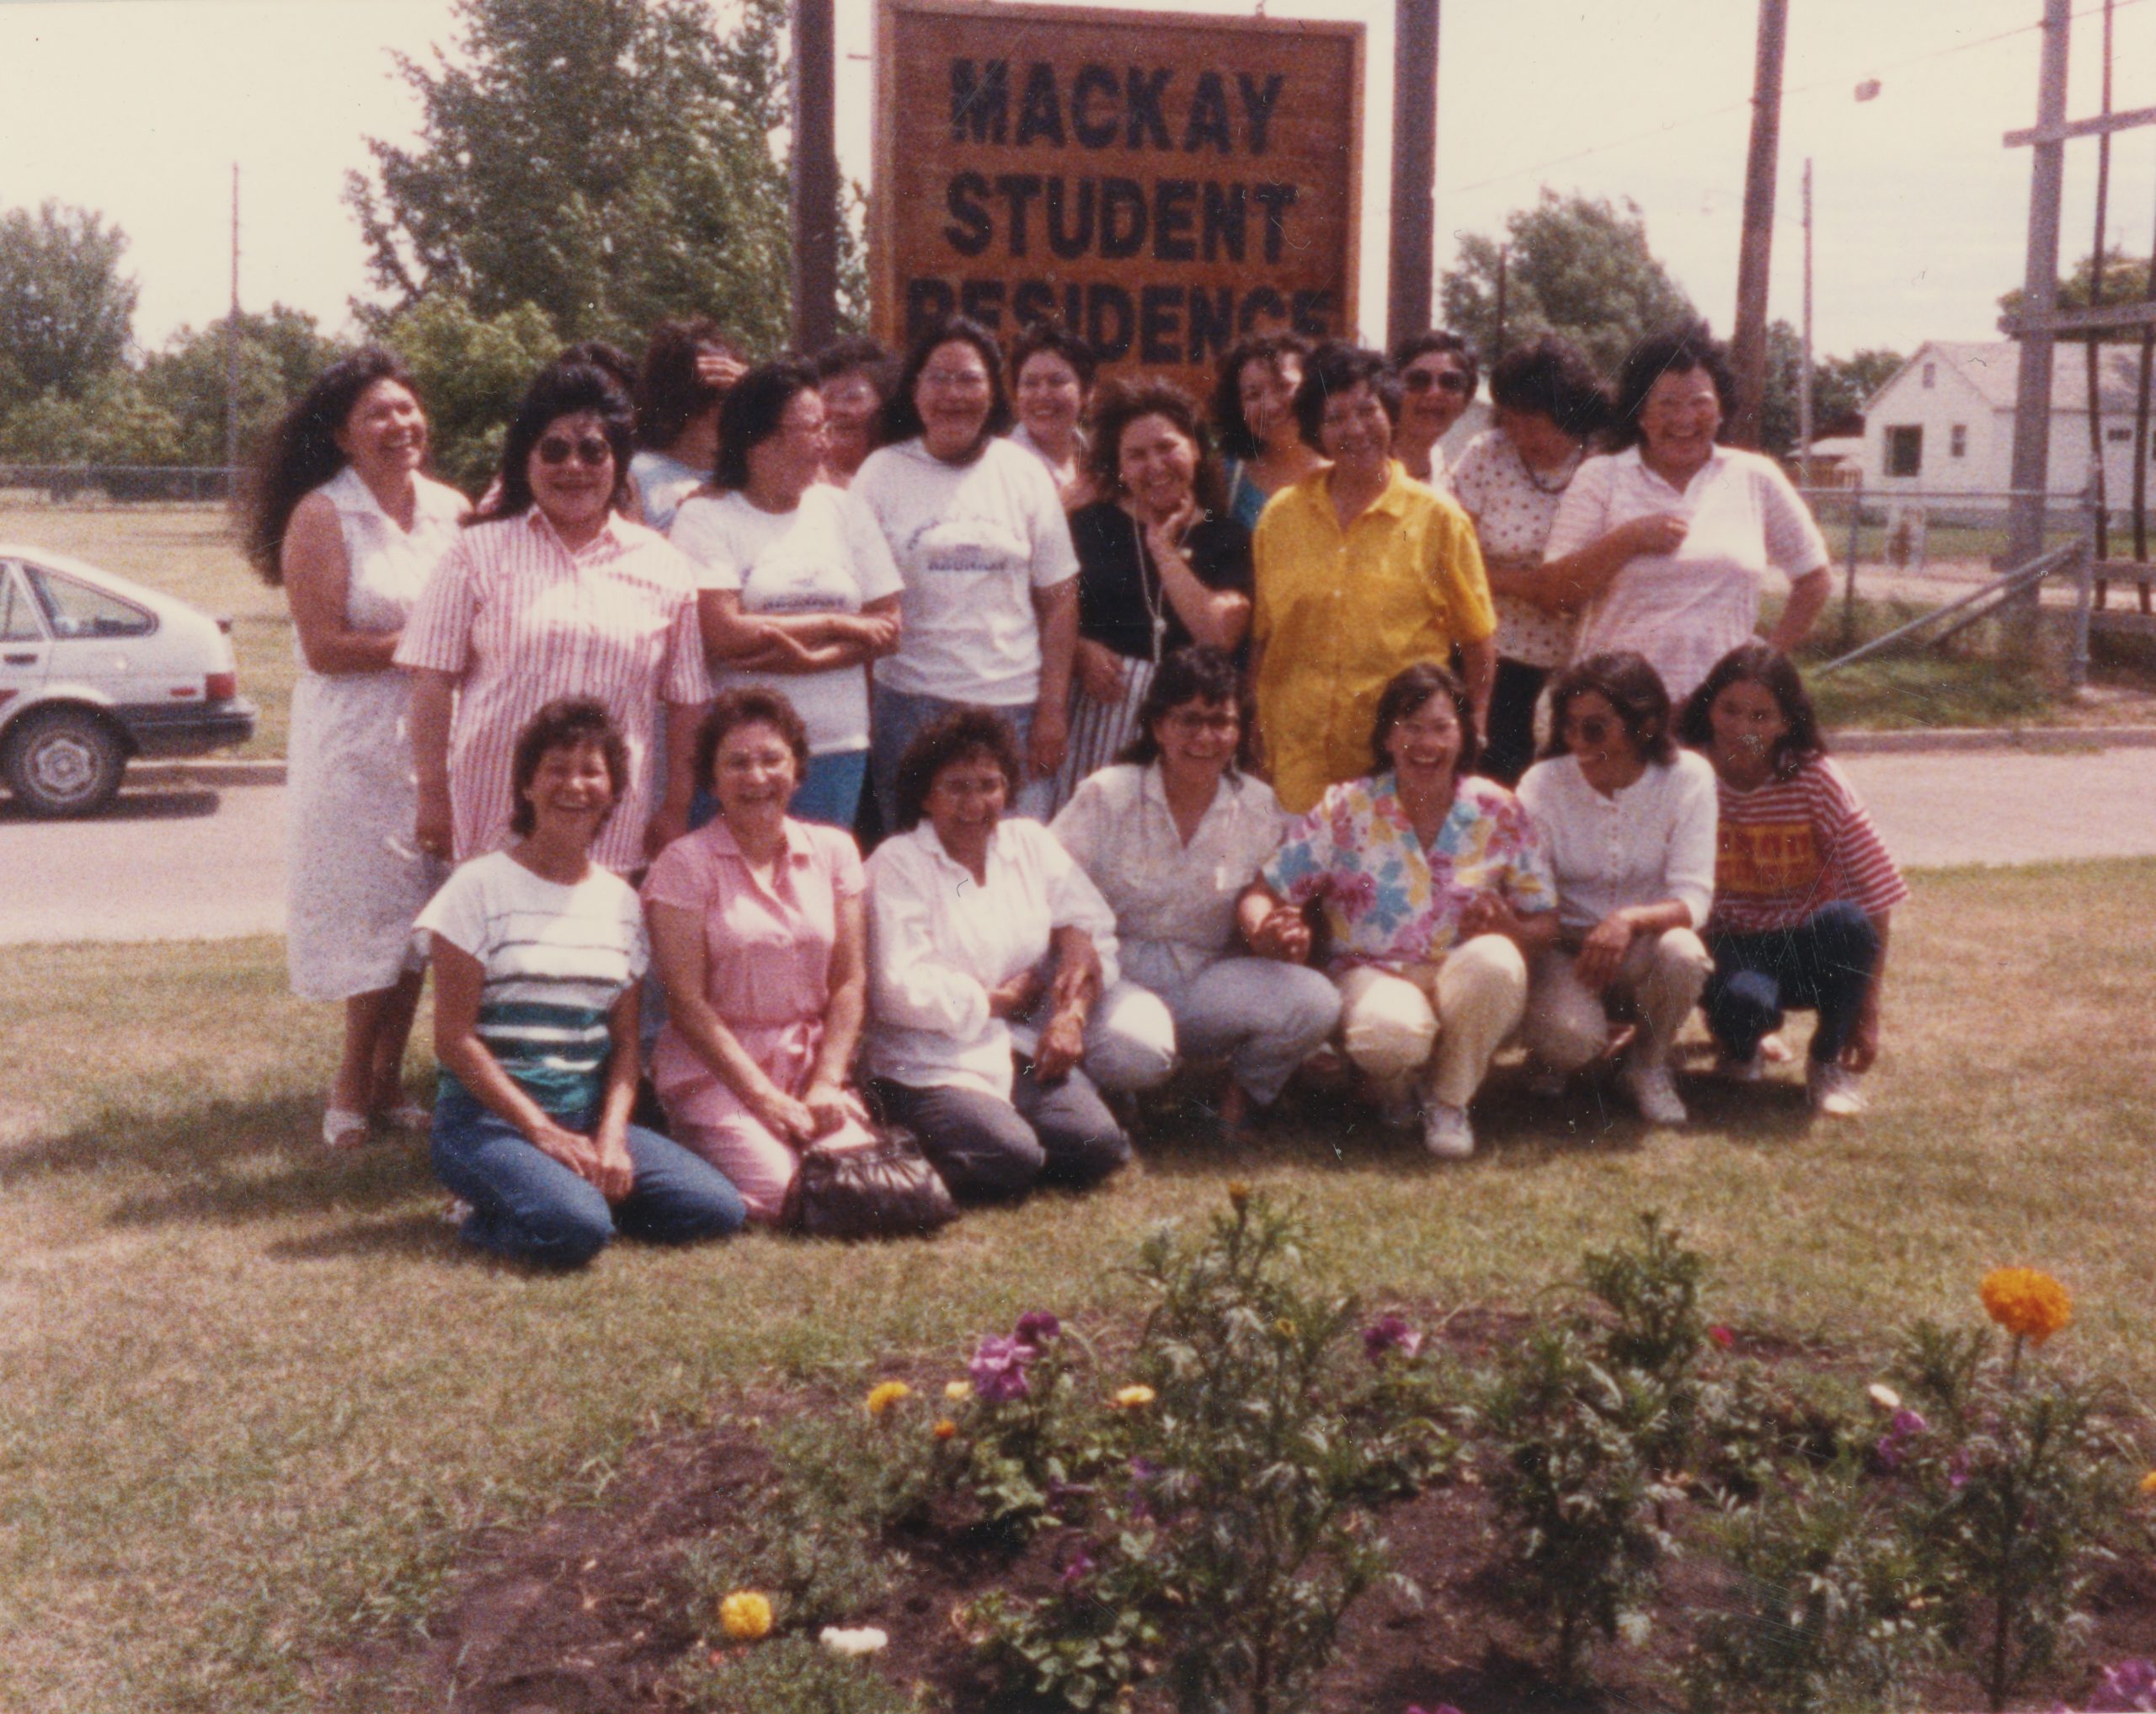 A group of twenty adults posing smiling in front of a MacKay Student Residence sign.